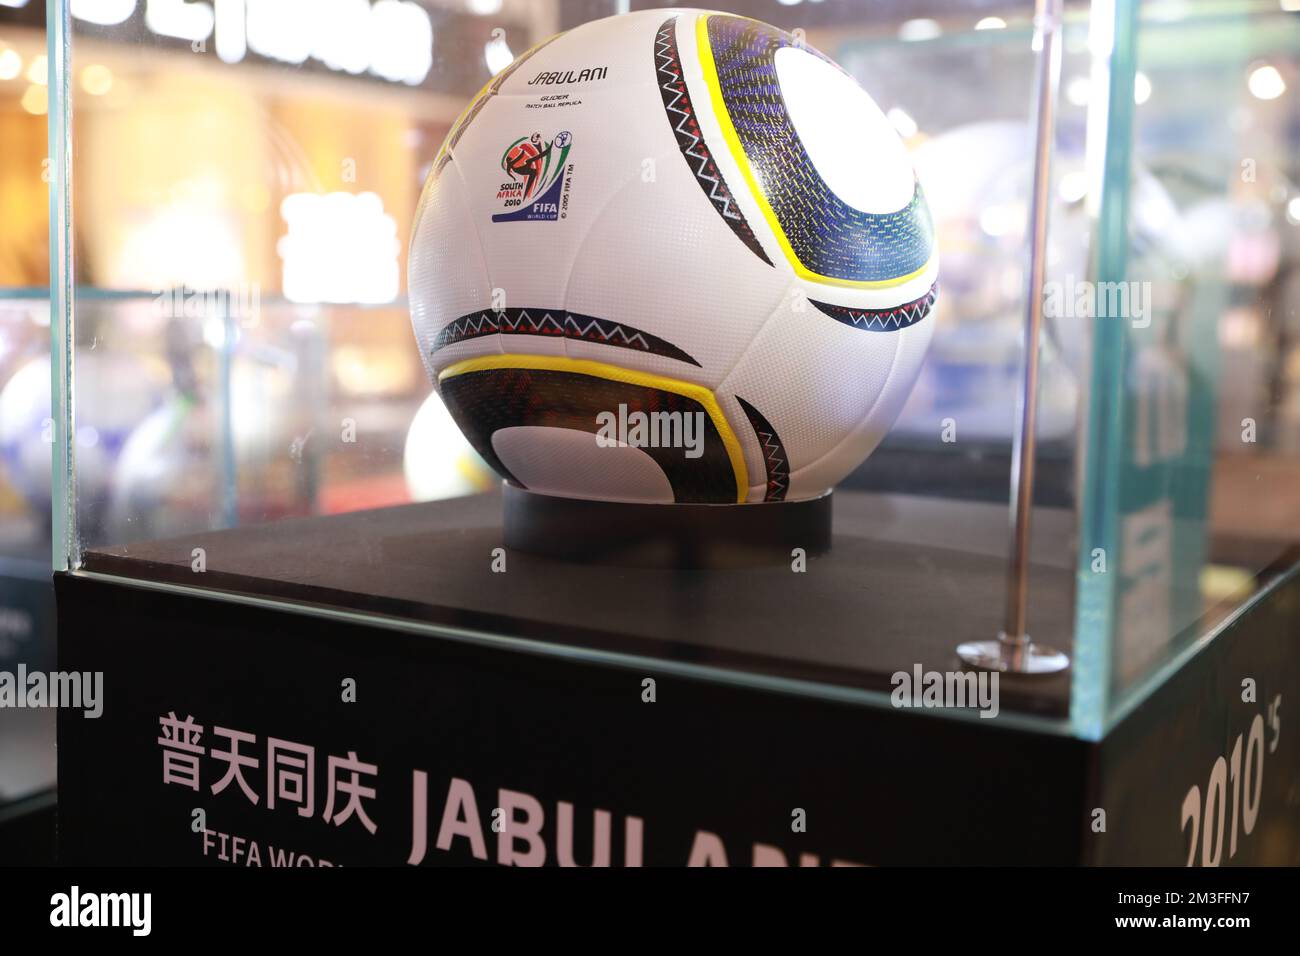 XI'AN, CHINA - DECEMBER 14, 2022 - The 2010 South Africa World Cup Football JABULANI is displayed at a shopping mall in Xi 'an, Shaanxi province, Chin Stock Photo